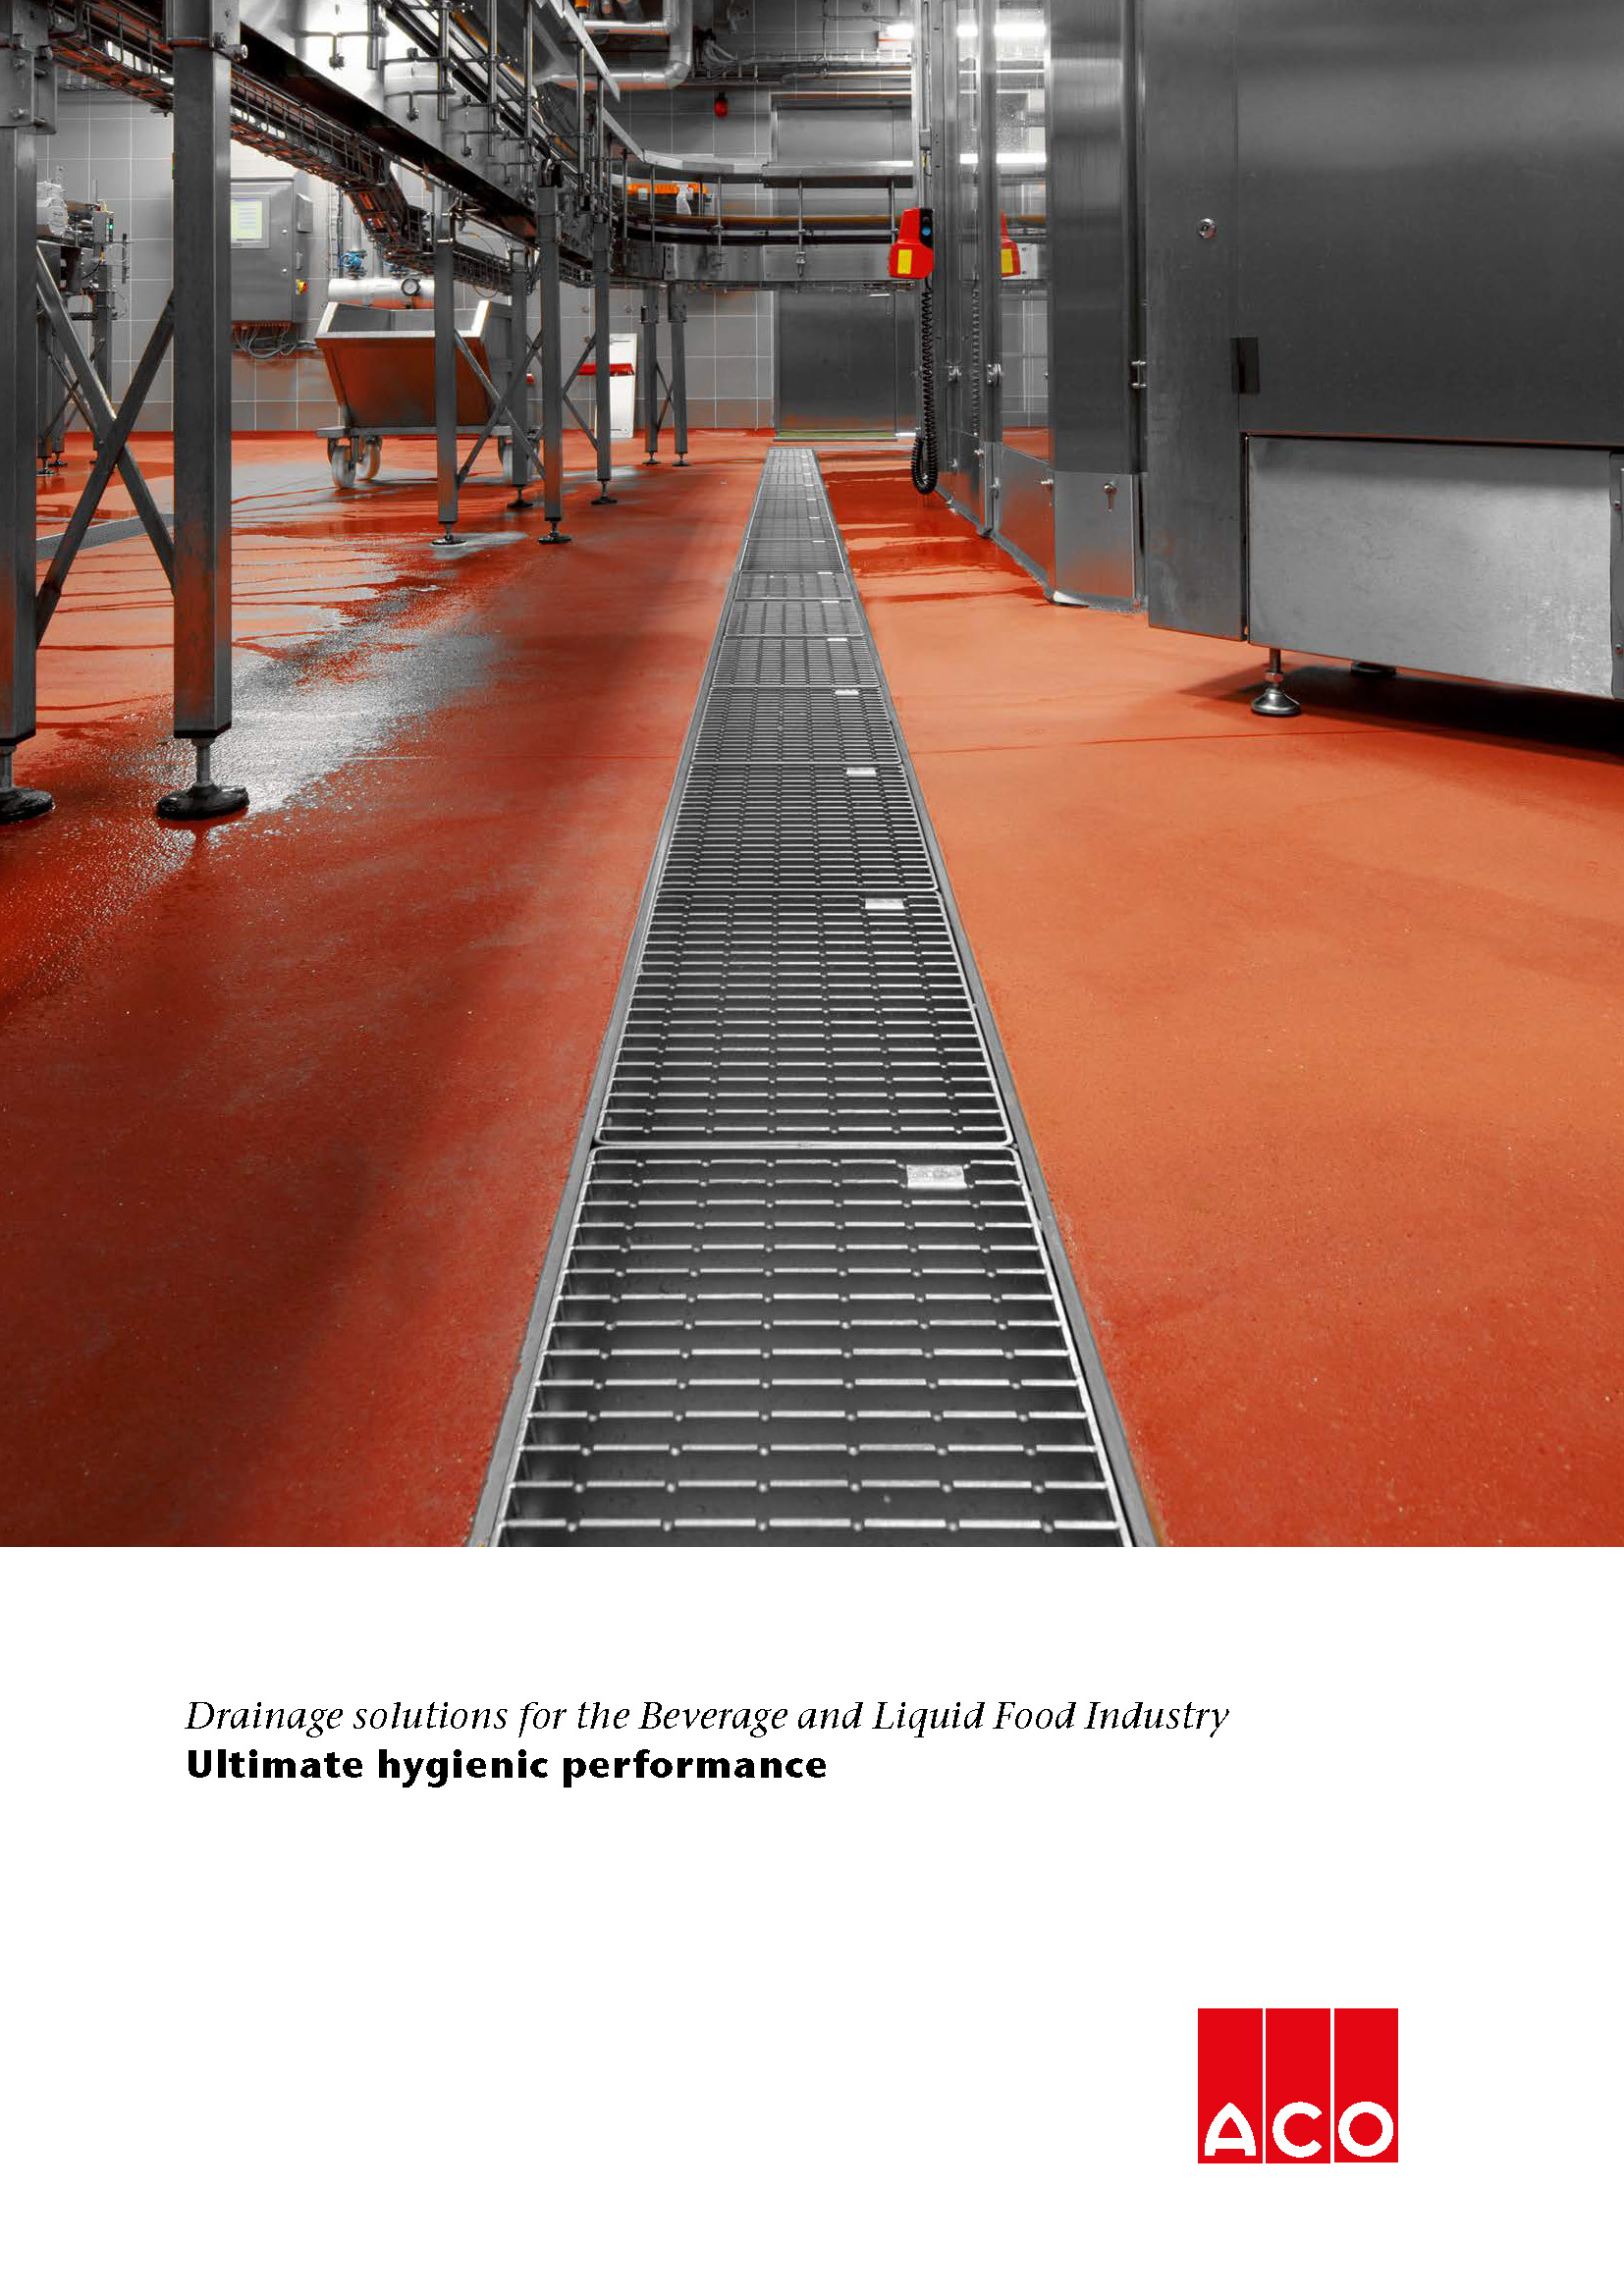 Drainage solutions for the Beverage and Liquid Food Industry